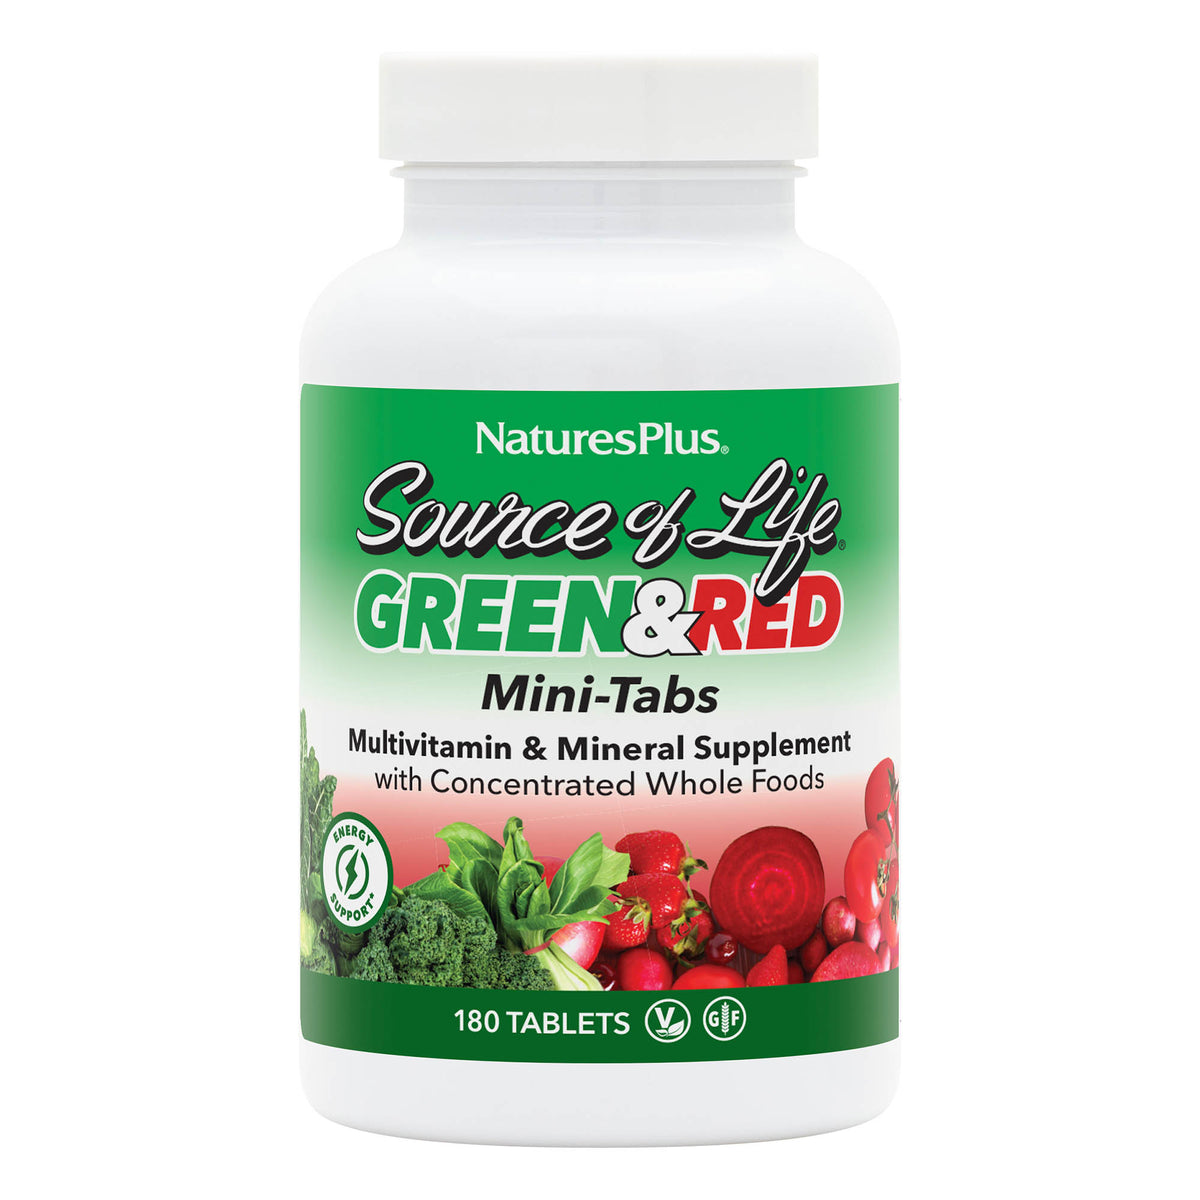 product image of Source of Life® Green and Red Multivitamin Bi-Layered Mini-Tablets containing 180 Count